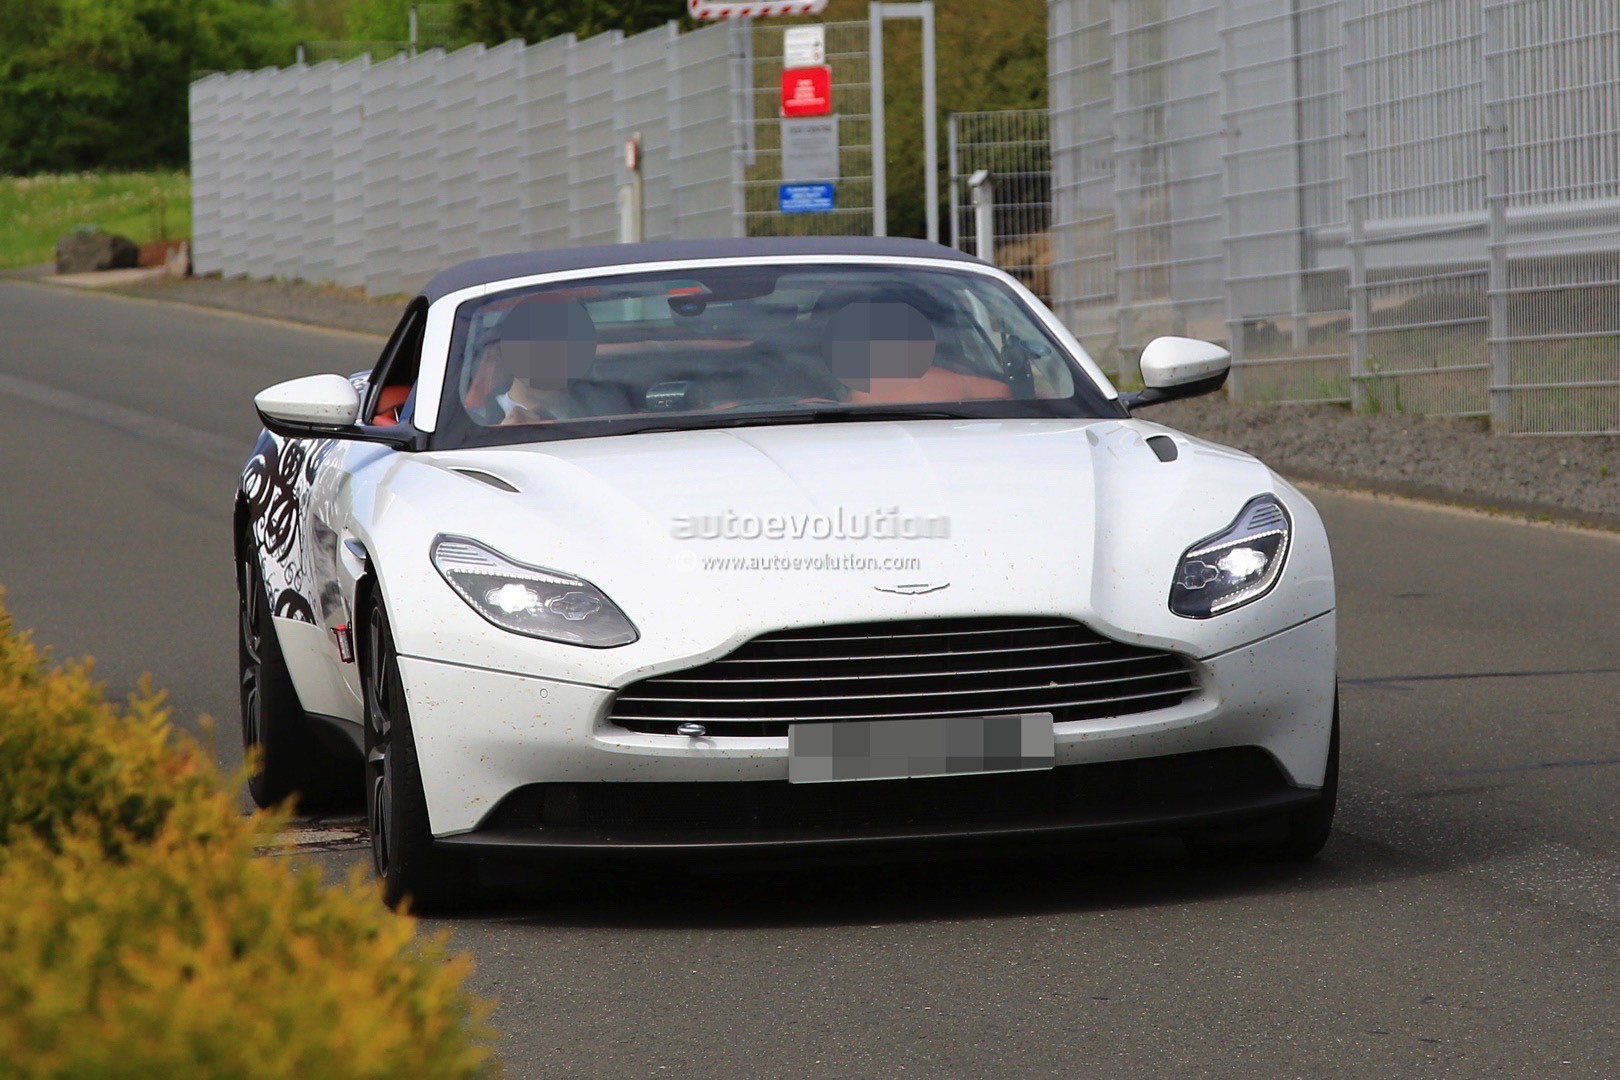 2016 - [Aston Martin] DB11 - Page 9 Aston-martin-puts-the-db11-volante-through-its-paces-at-the-nurburgring_7